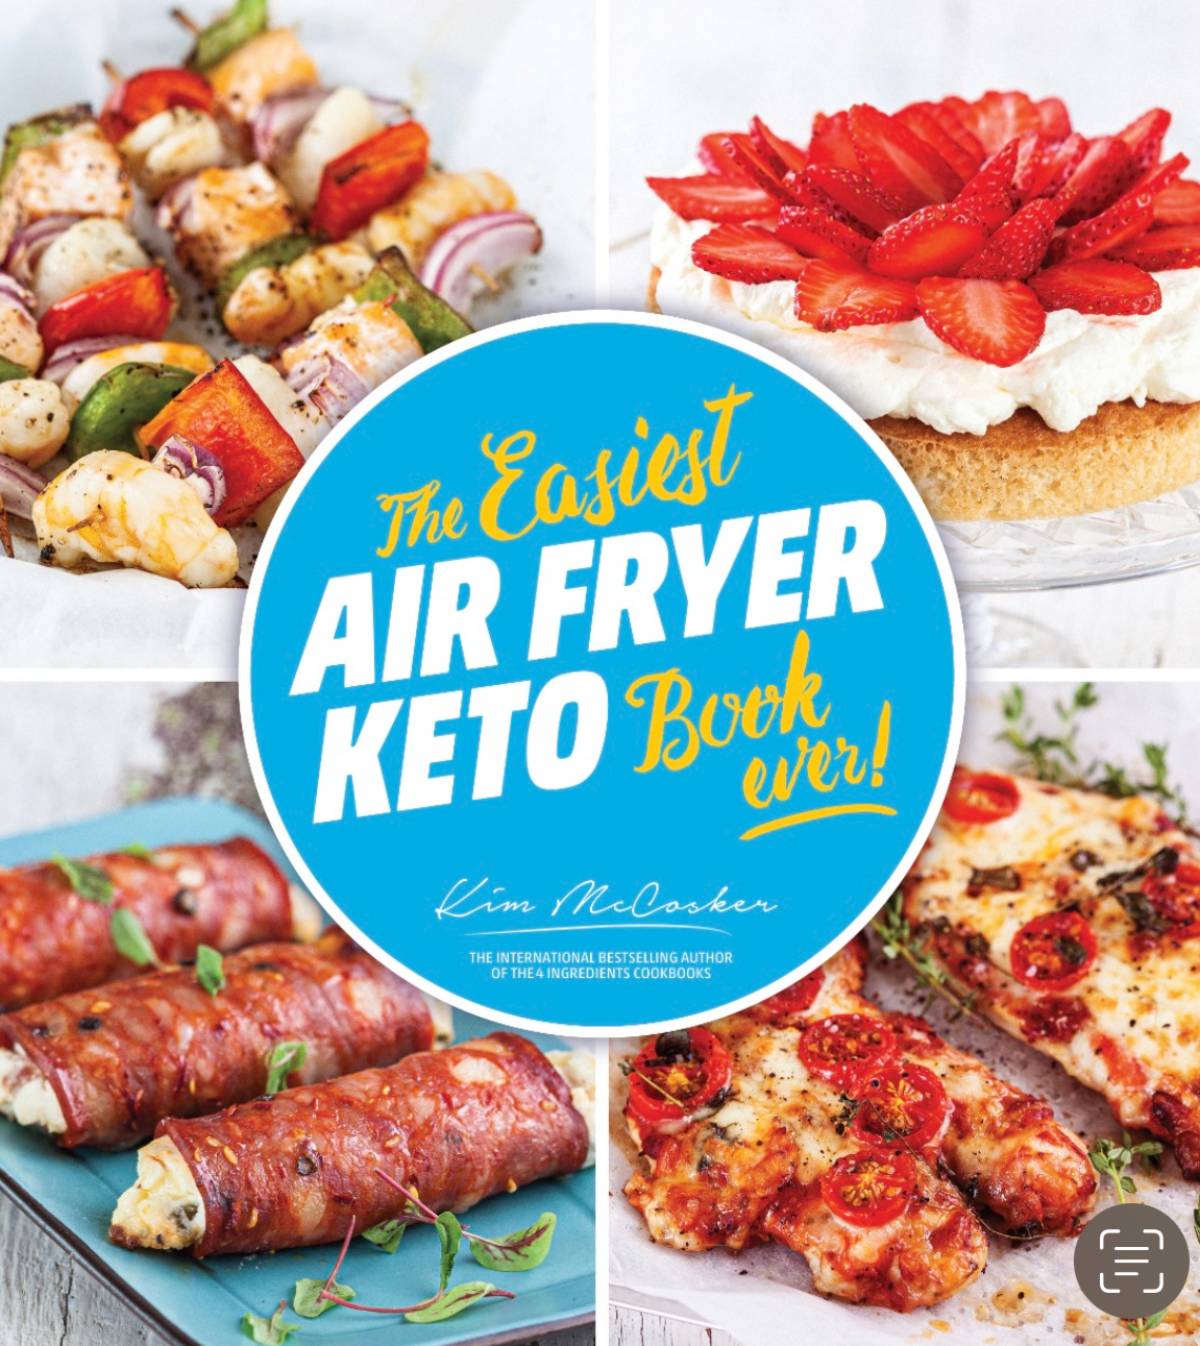 The Easiest Air Fryer KETO Book ever